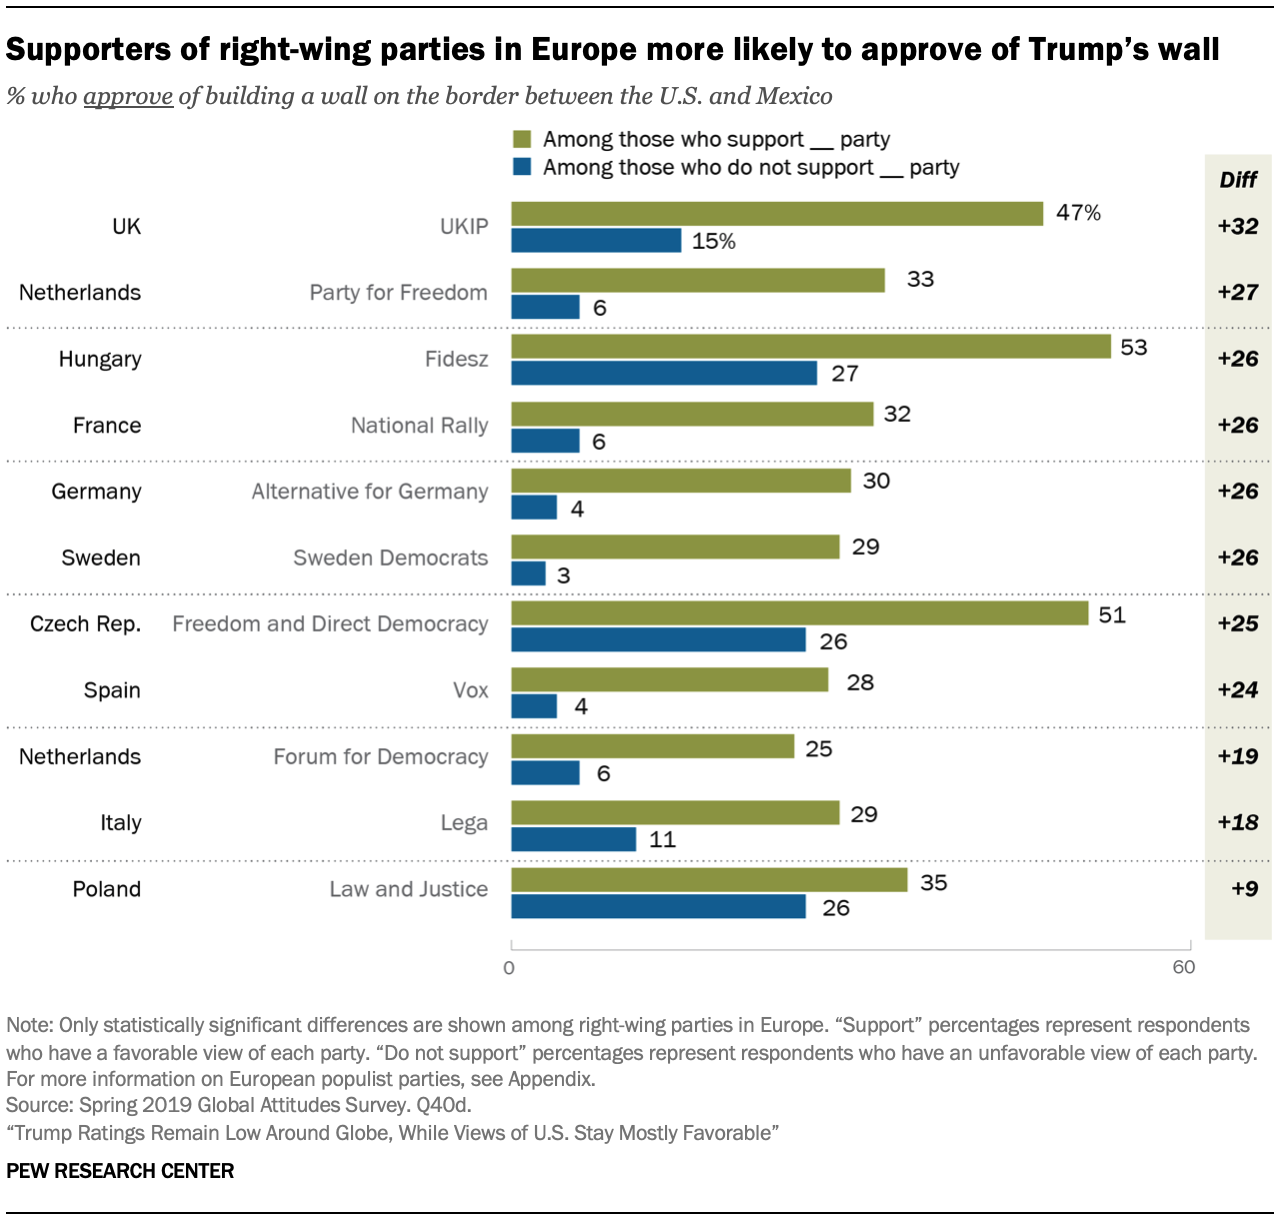 Supporters of right-wing parties in Europe more likely to approve of Trump’s wall 